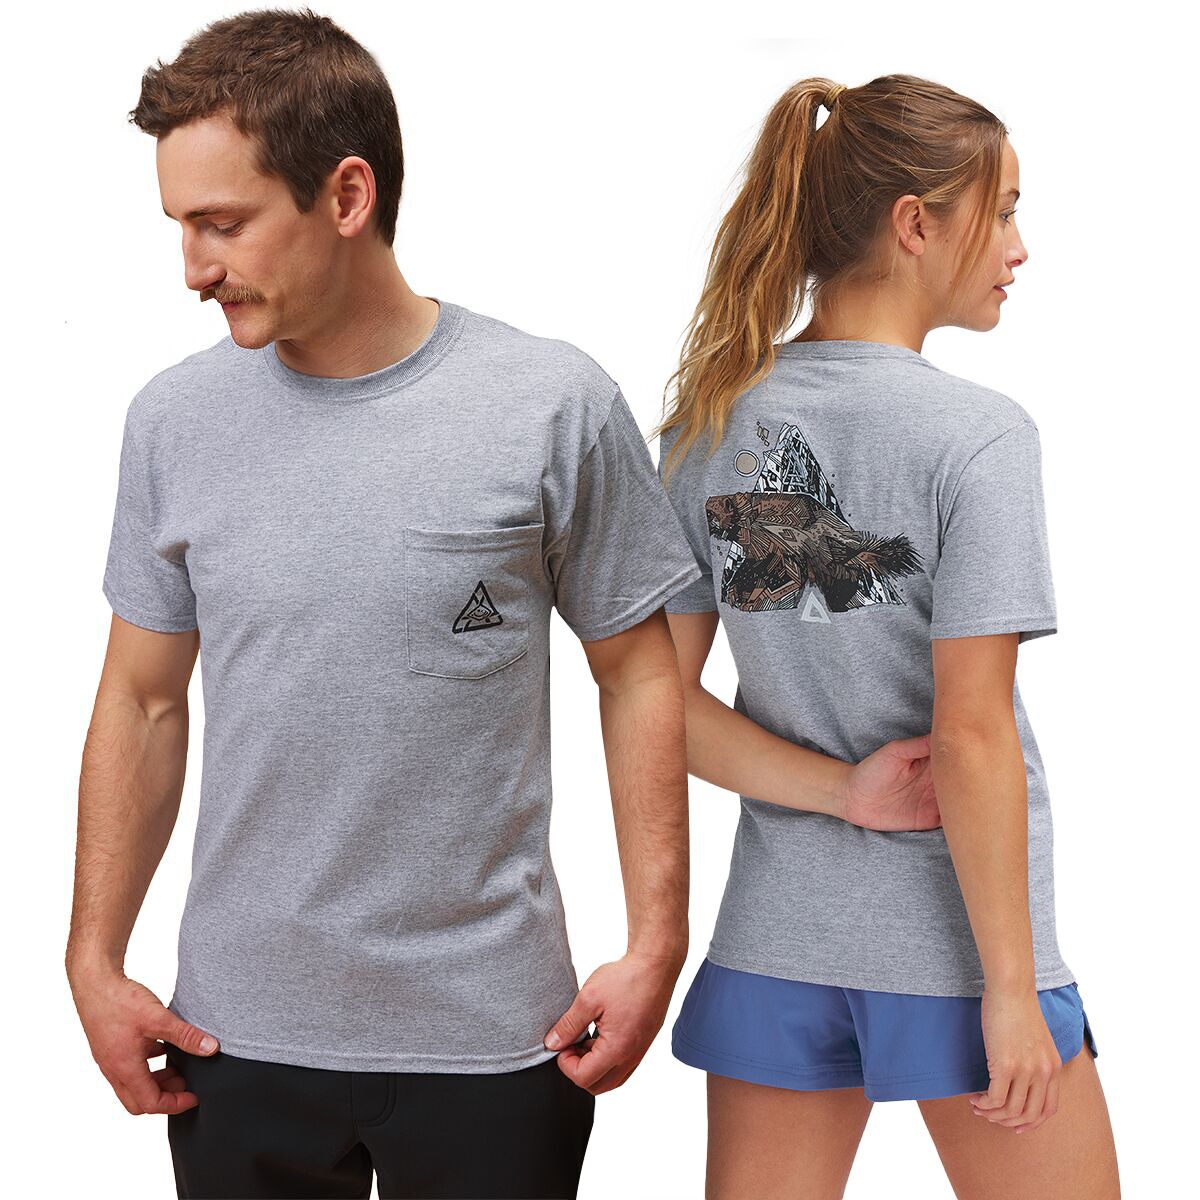 Backcountry Natural Selection Tour AK Wolverine Short-Sleeve T-Shirt